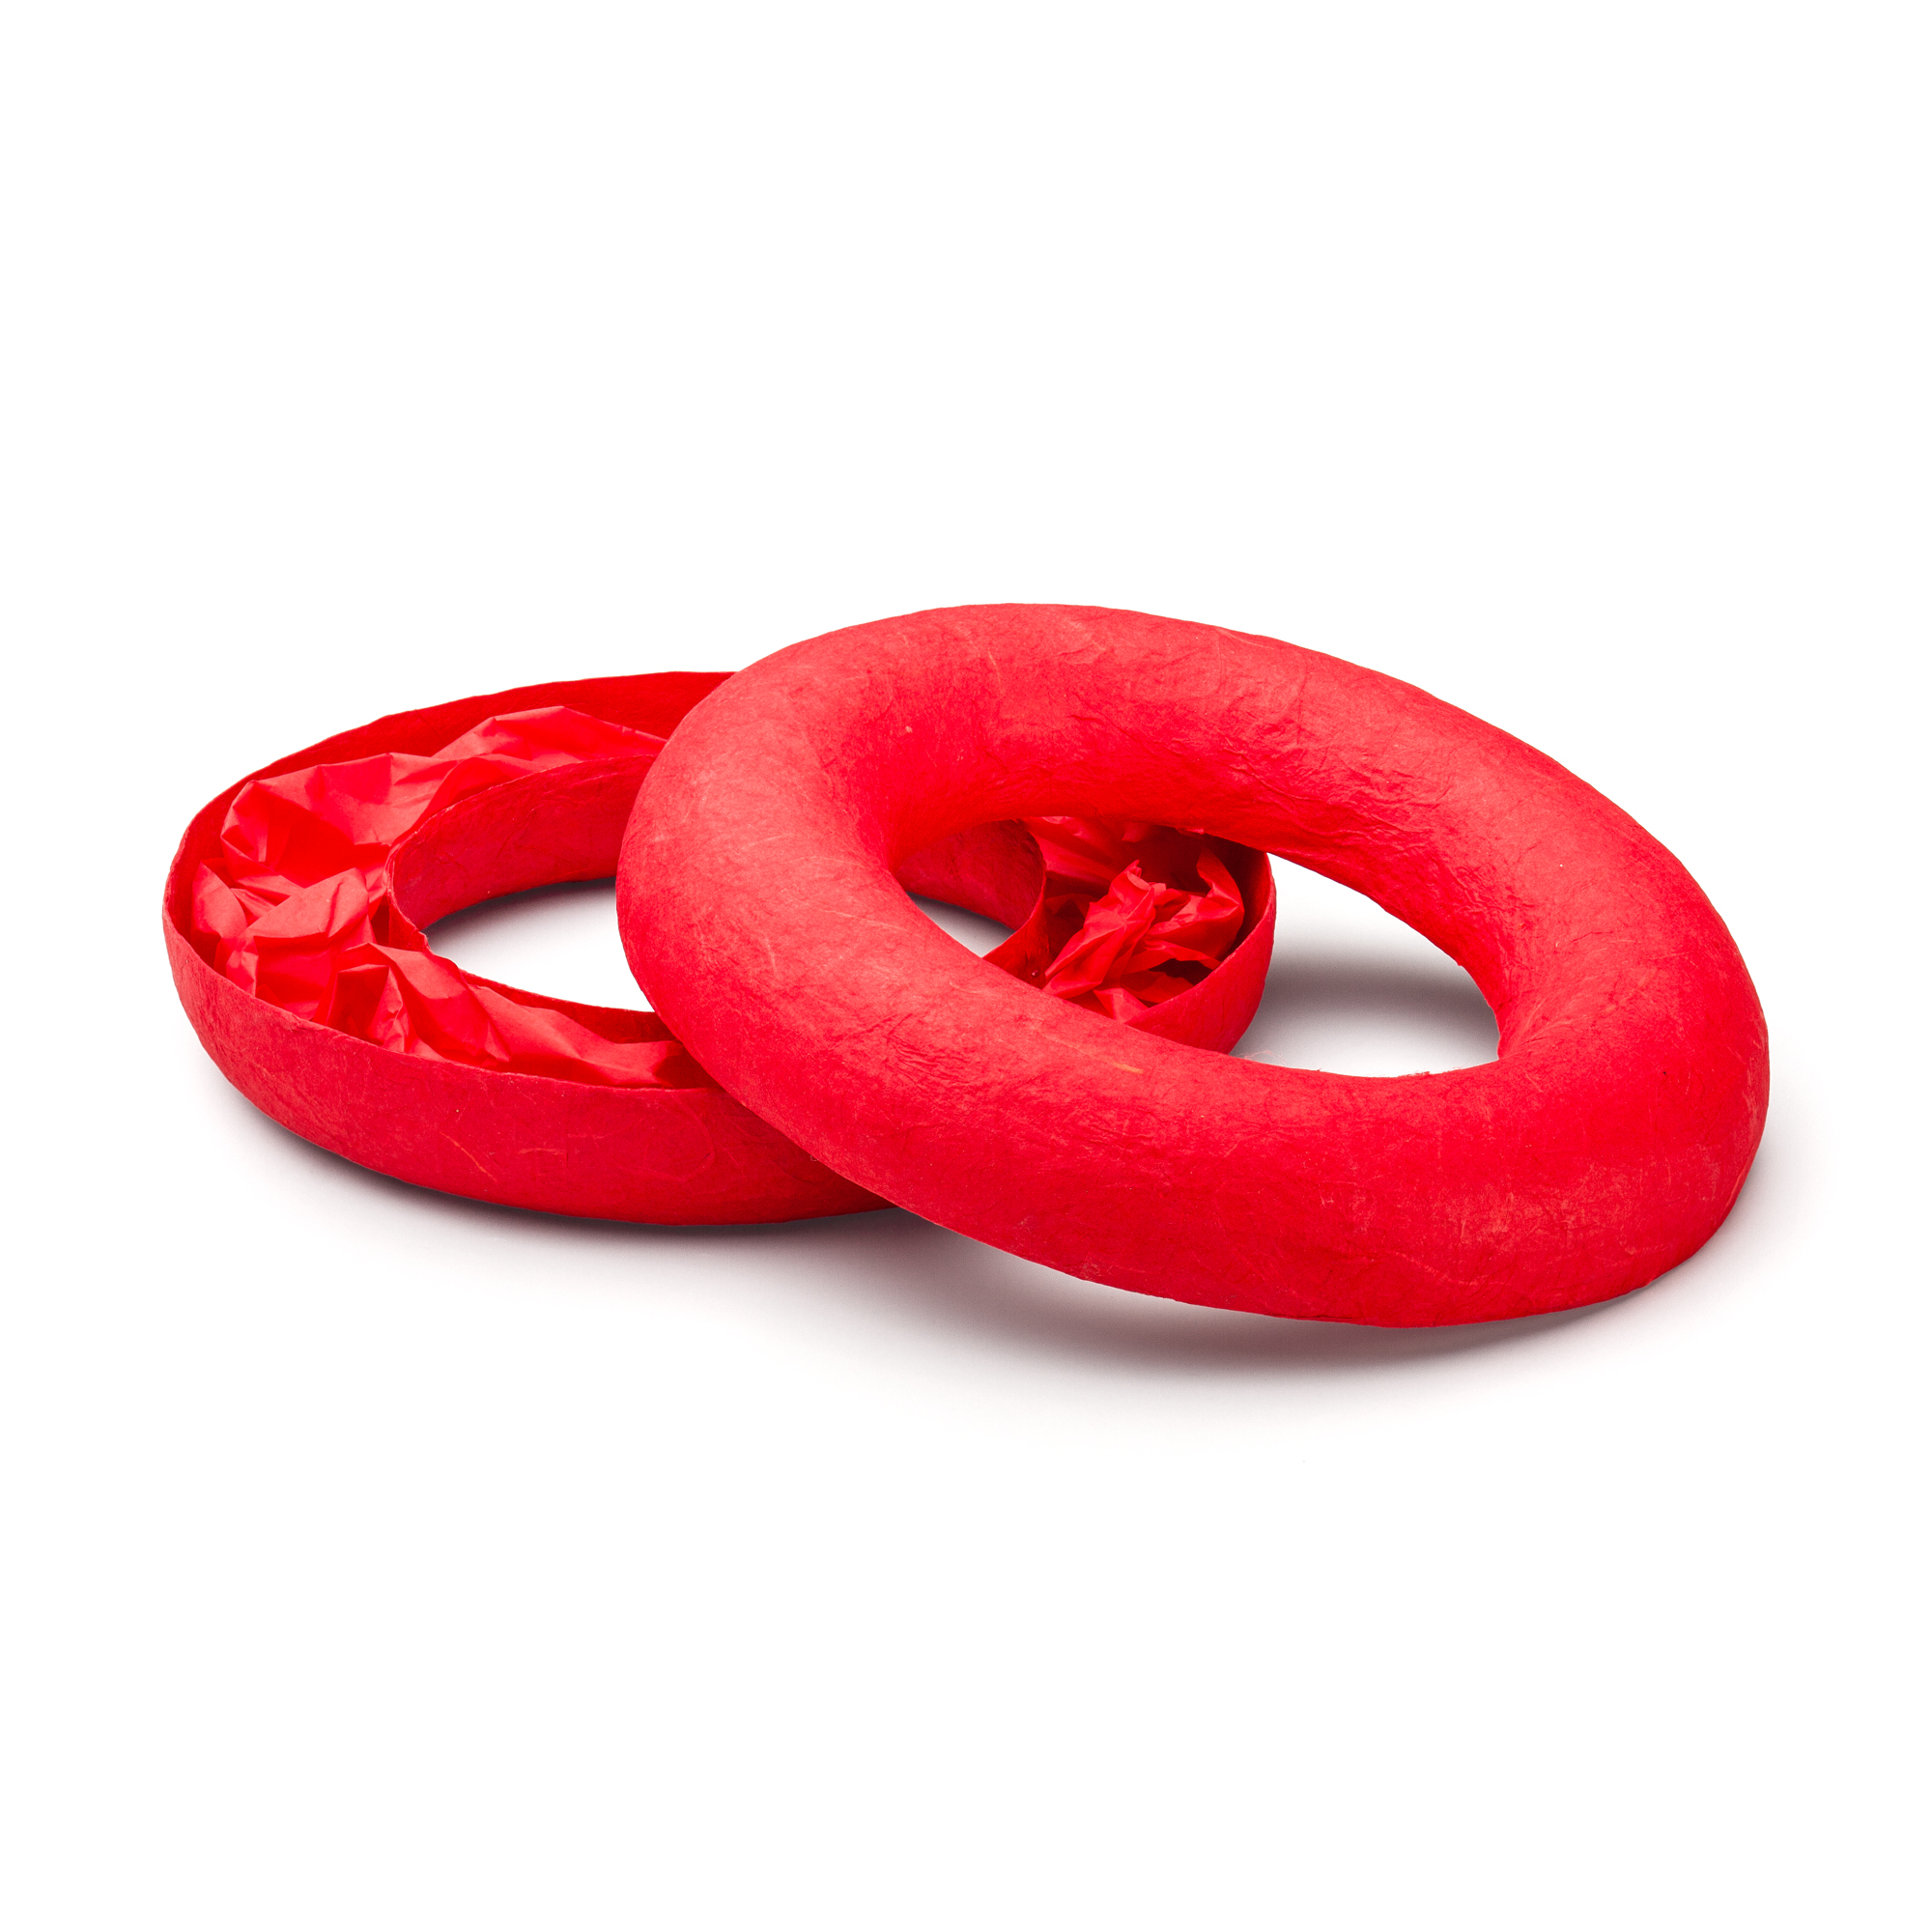 Donut large, 190 mm, red